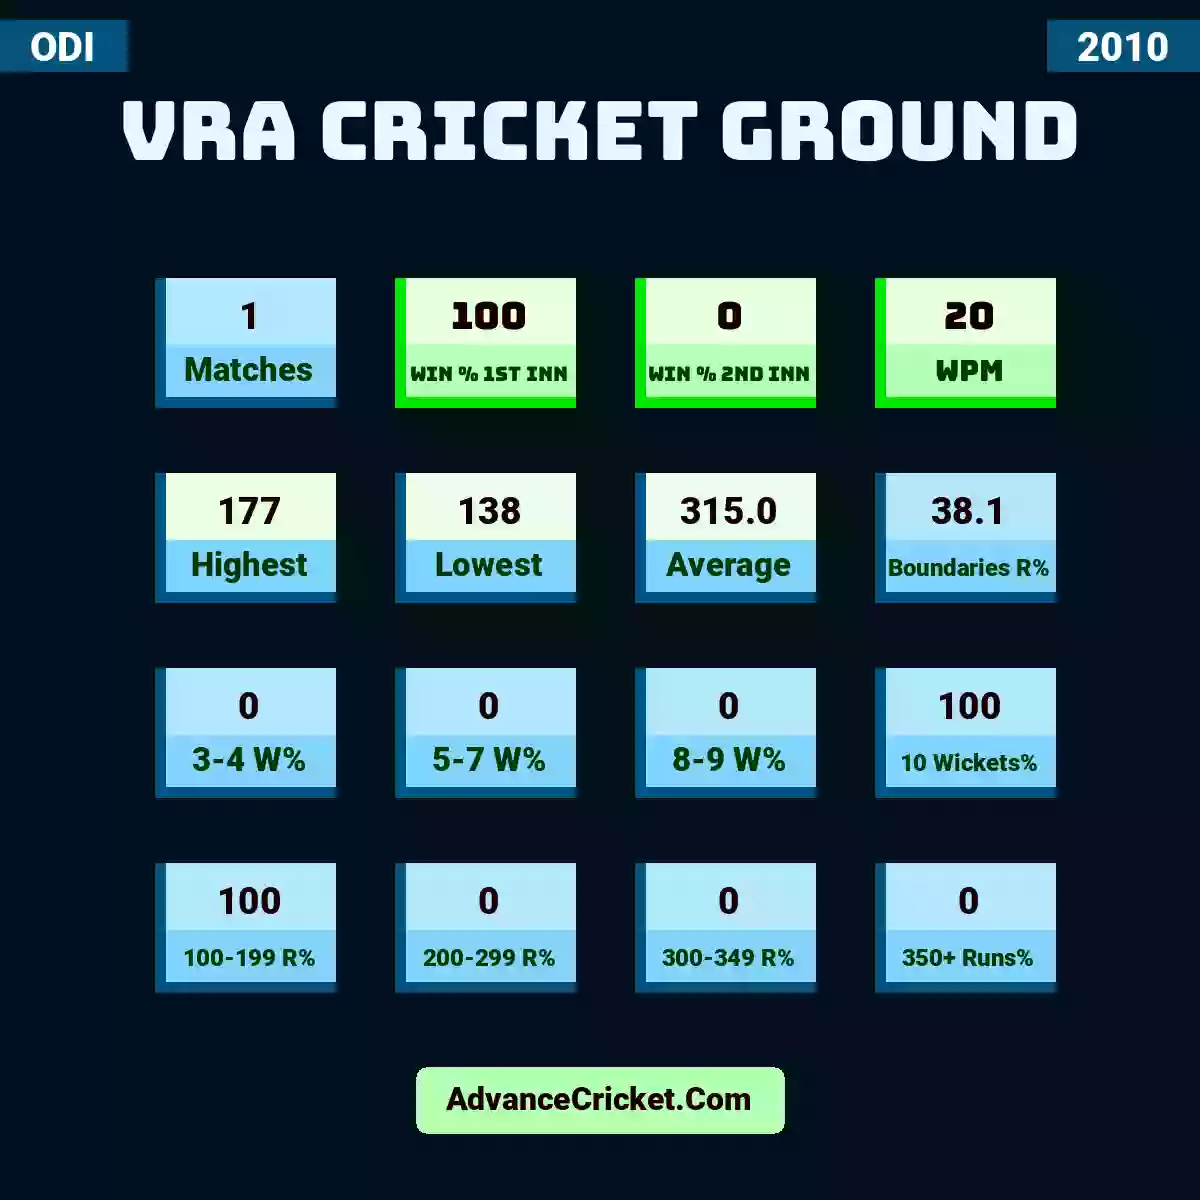 Image showing VRA Cricket Ground with Matches: 1, Win % 1st Inn: 100, Win % 2nd Inn: 0, WPM: 20, Highest: 177, Lowest: 138, Average: 315.0, Boundaries R%: 38.1, 3-4 W%: 0, 5-7 W%: 0, 8-9 W%: 0, 10 Wickets%: 100, 100-199 R%: 100, 200-299 R%: 0, 300-349 R%: 0, 350+ Runs%: 0.